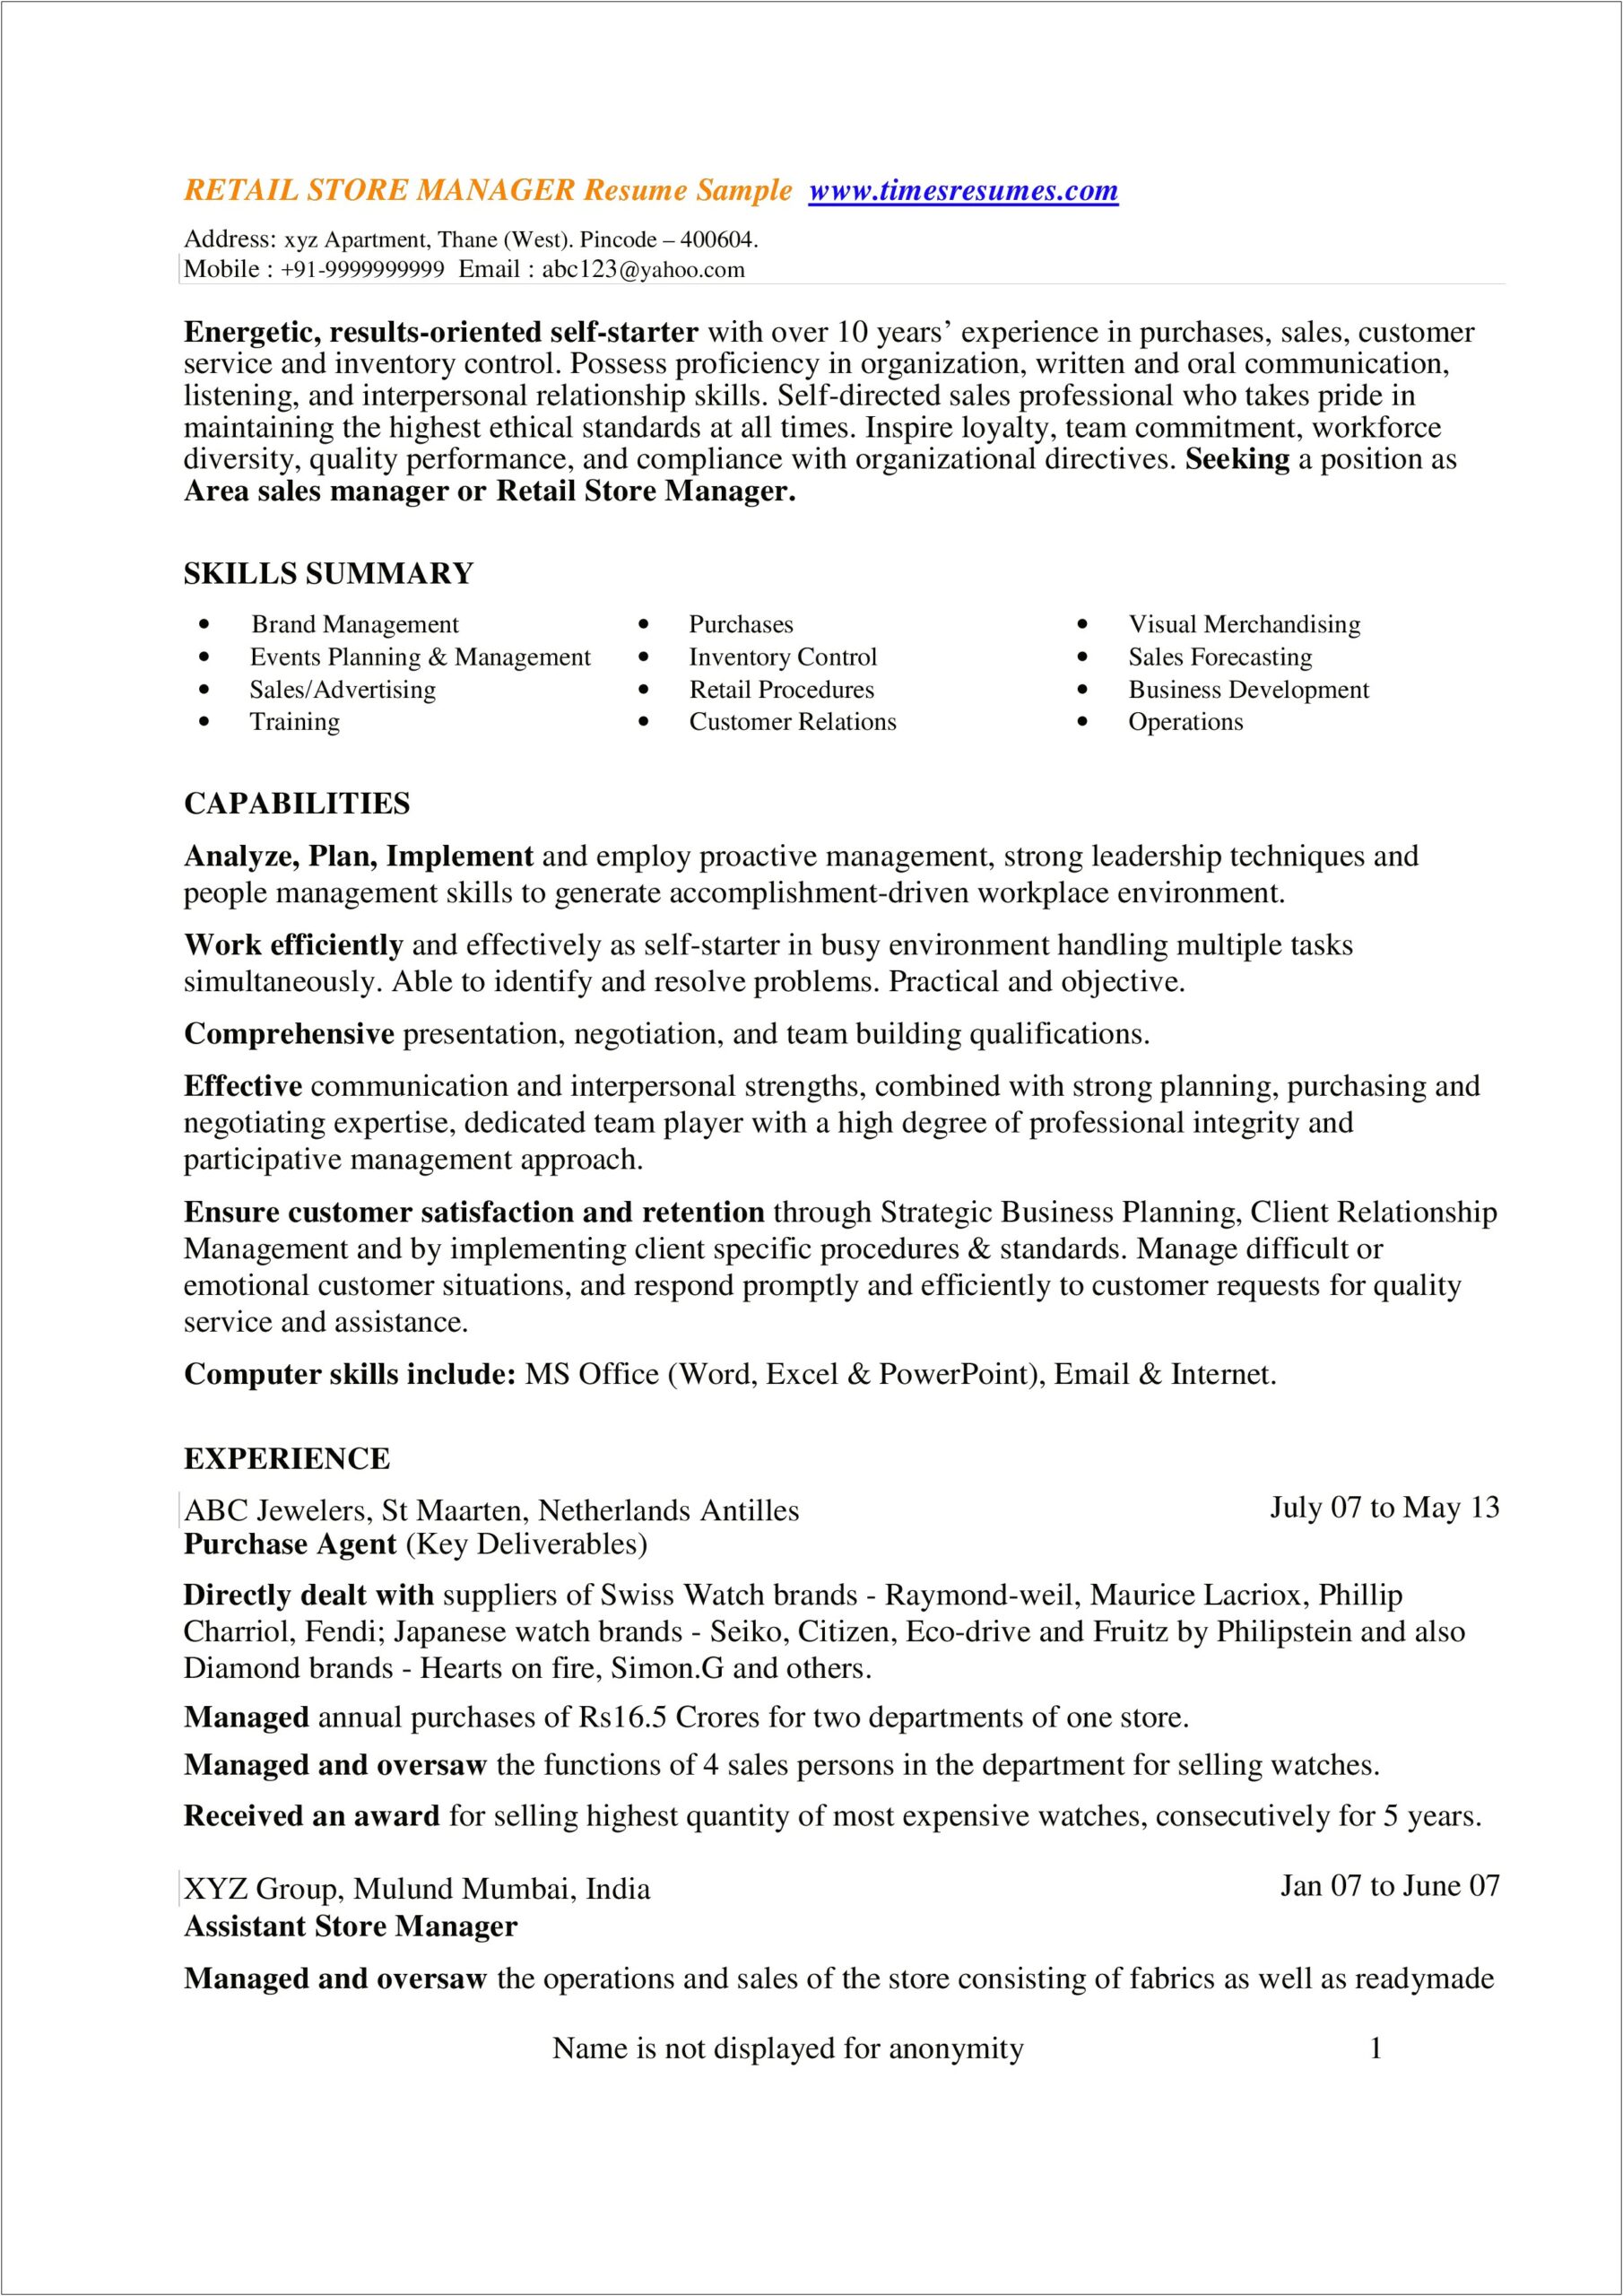 Resume Templates For Retail Management Positions